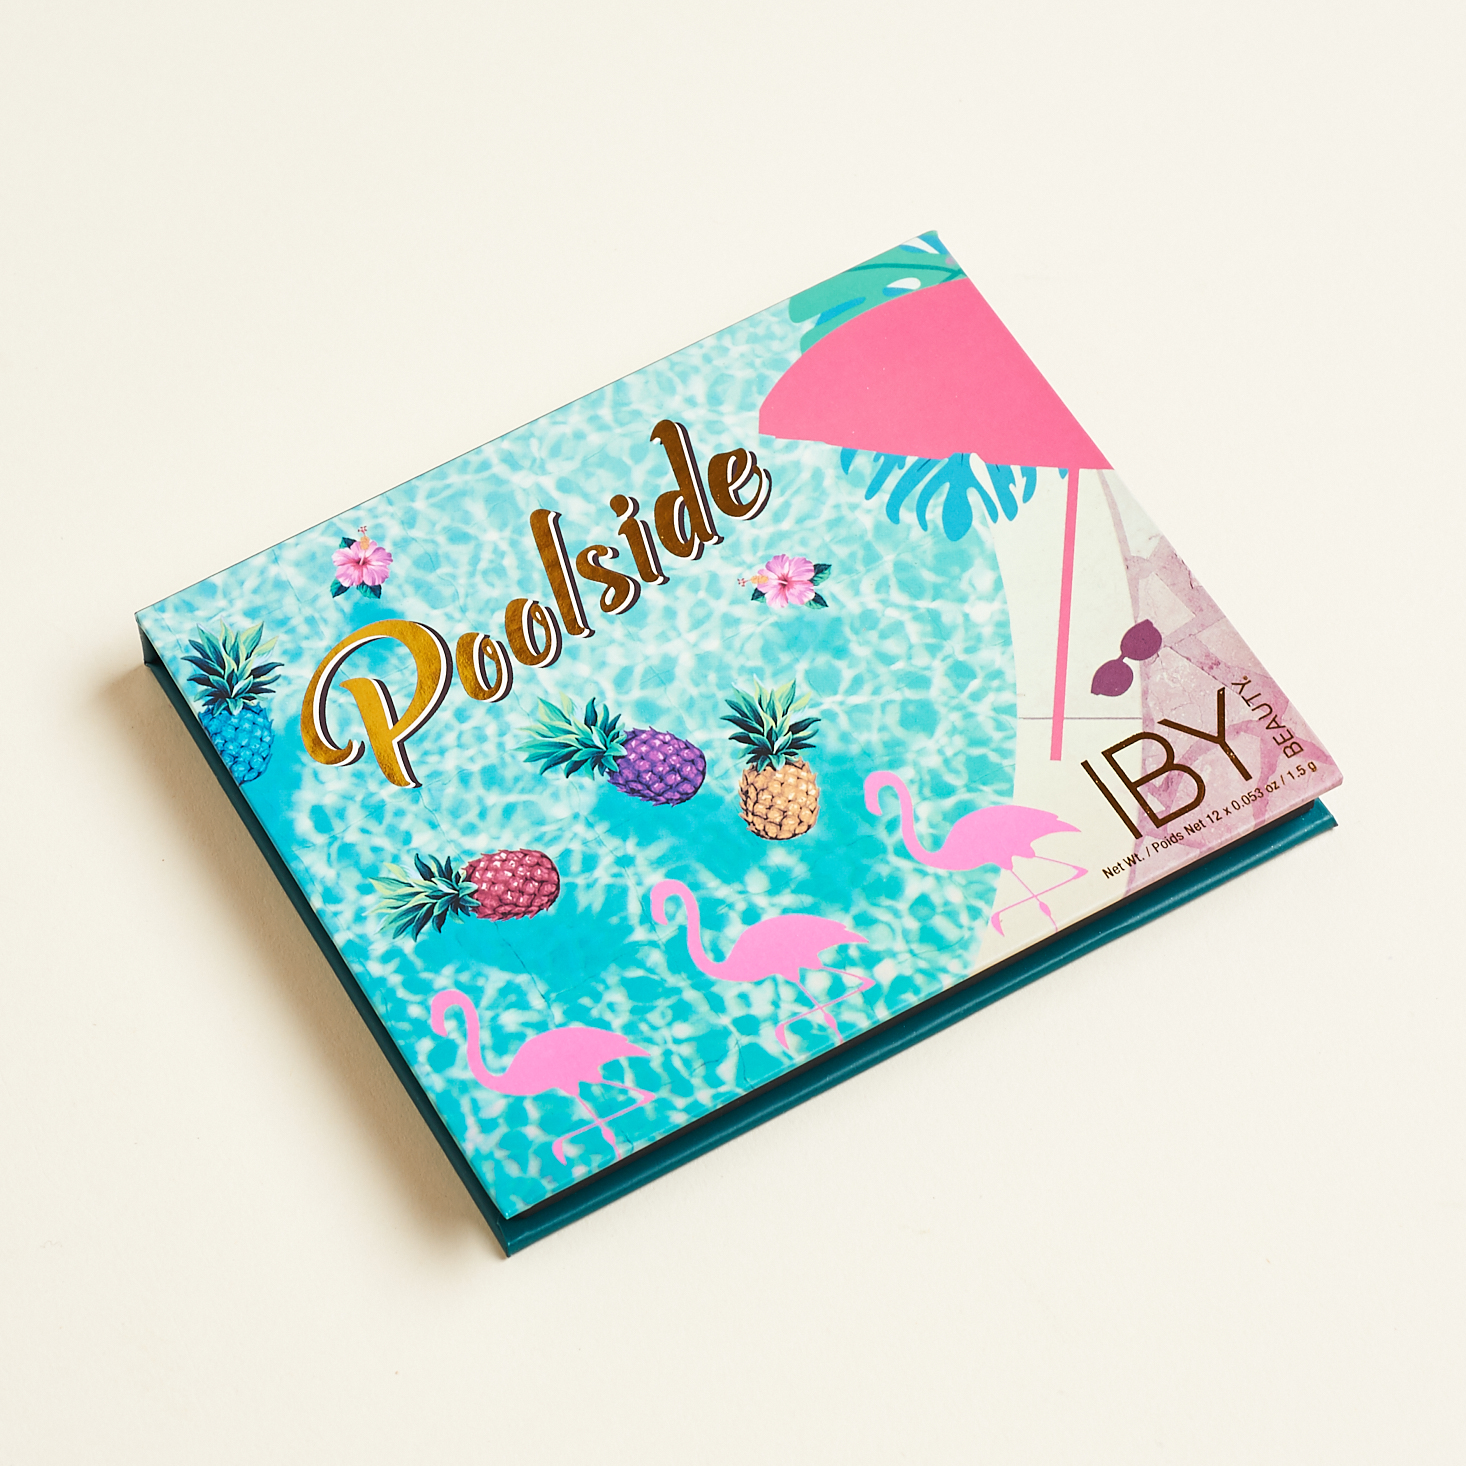 lid of the poolside palette featuring a summery pool illustration